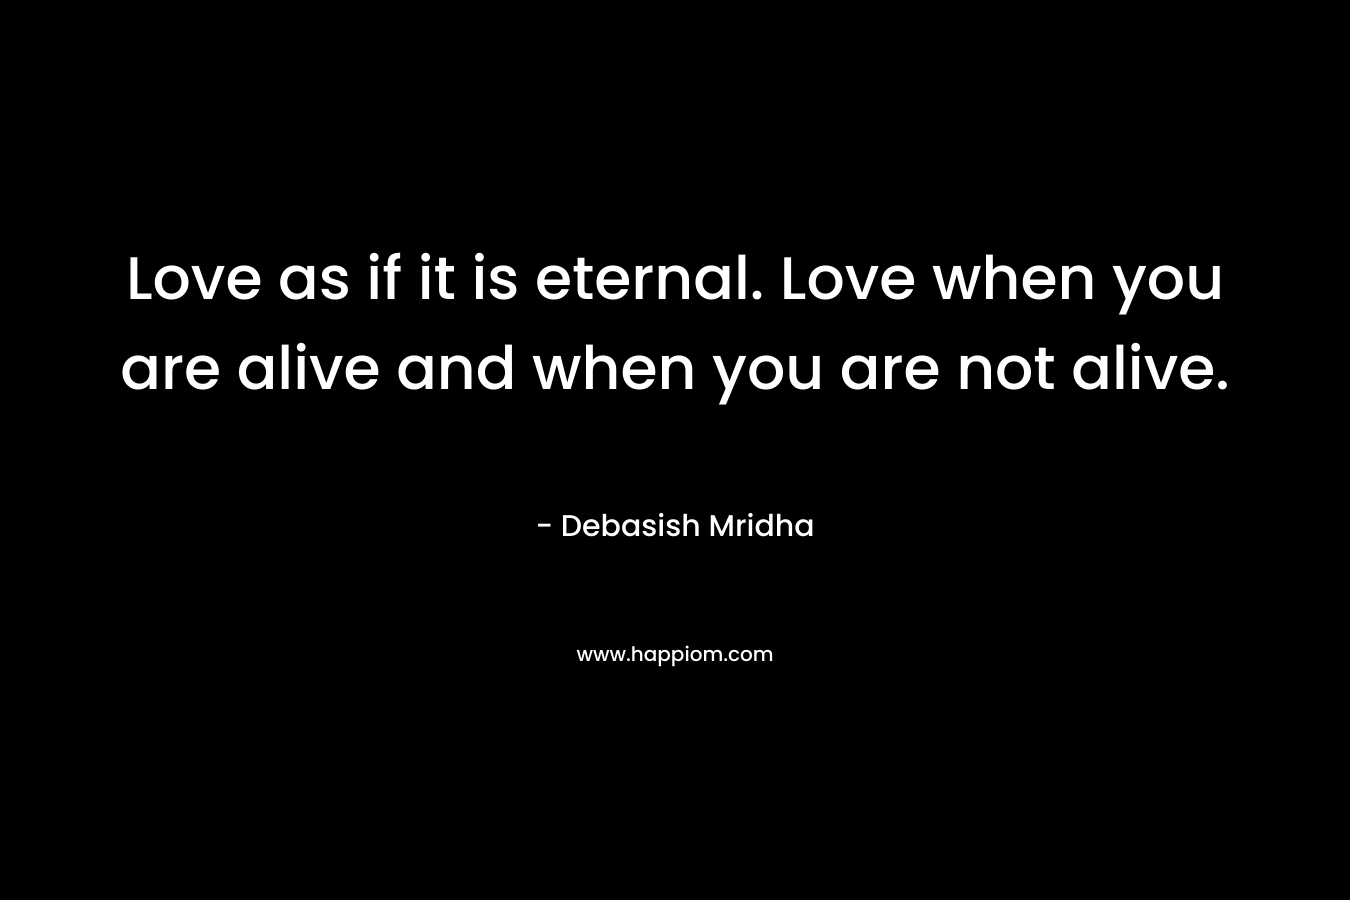 Love as if it is eternal. Love when you are alive and when you are not alive.